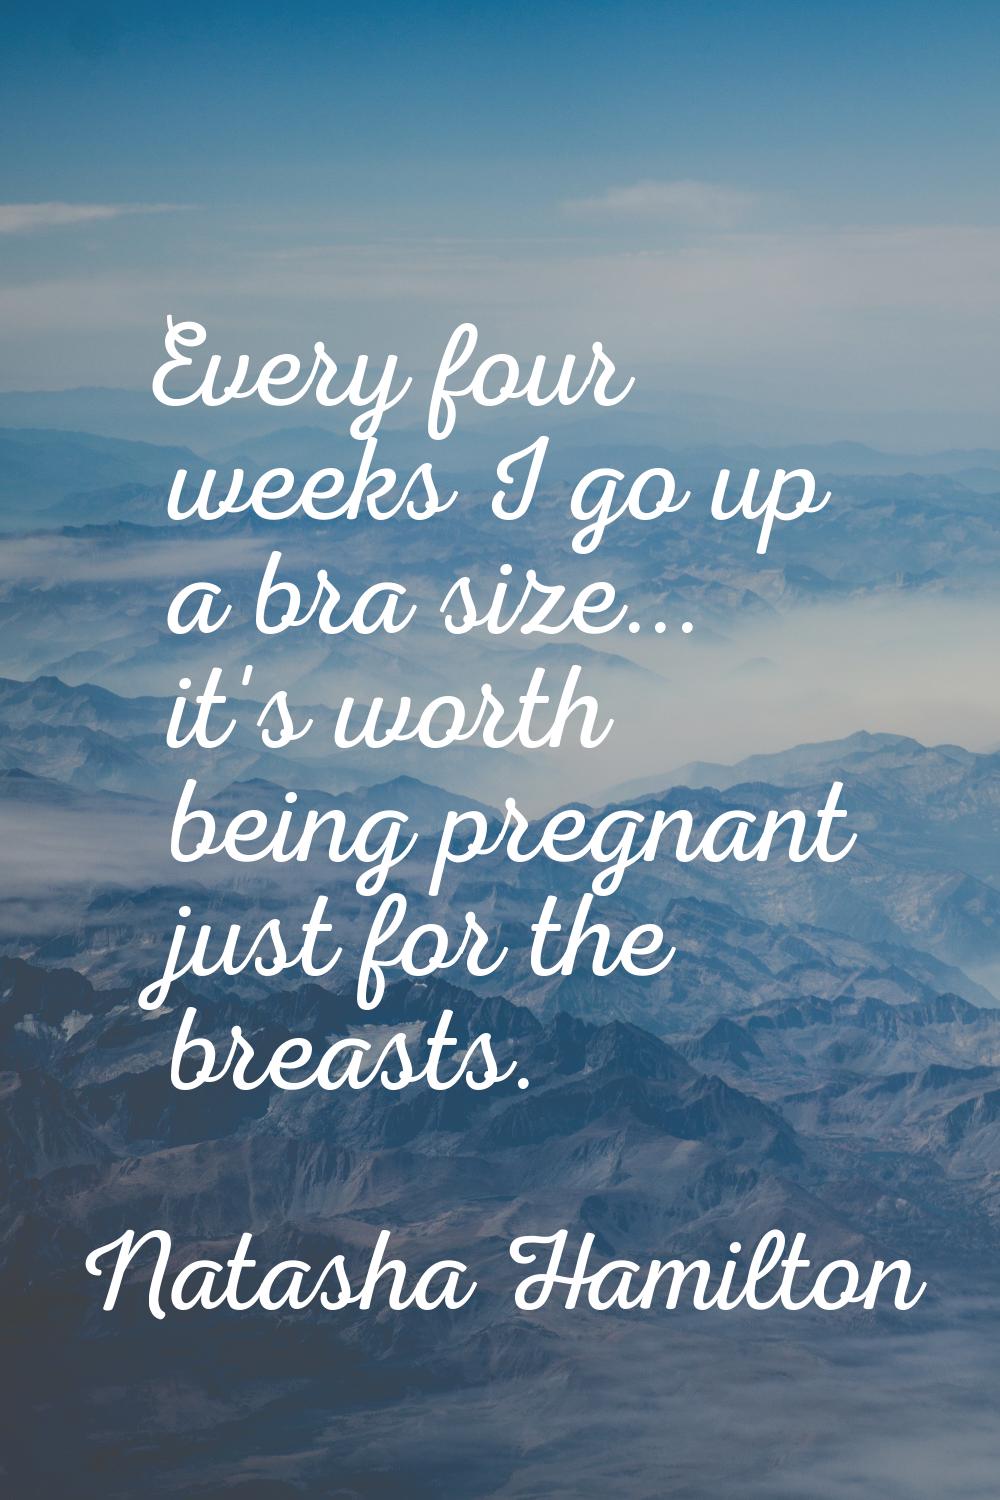 Every four weeks I go up a bra size... it's worth being pregnant just for the breasts.